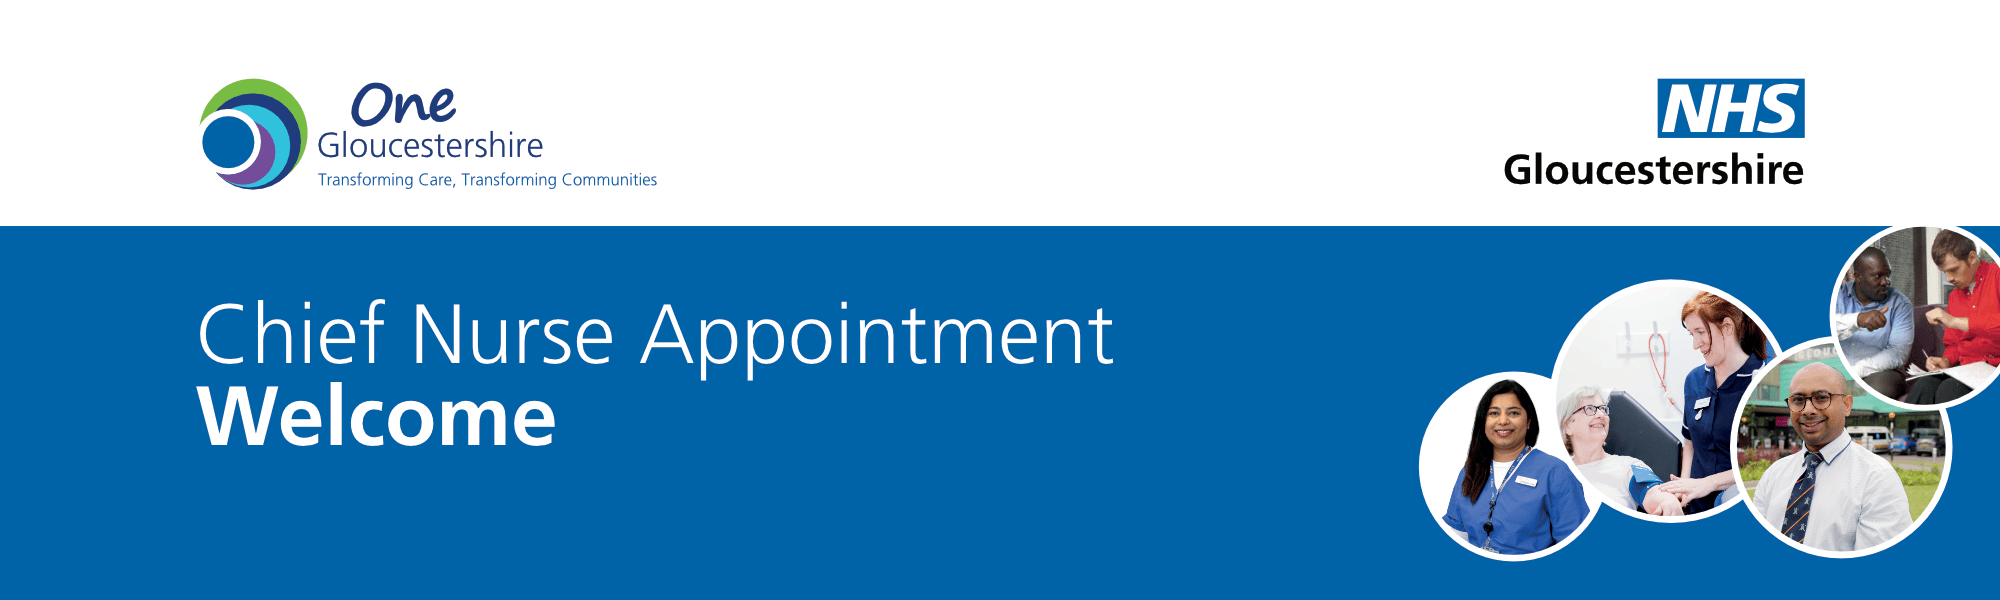 Chief Nurse Appointment - Welcome